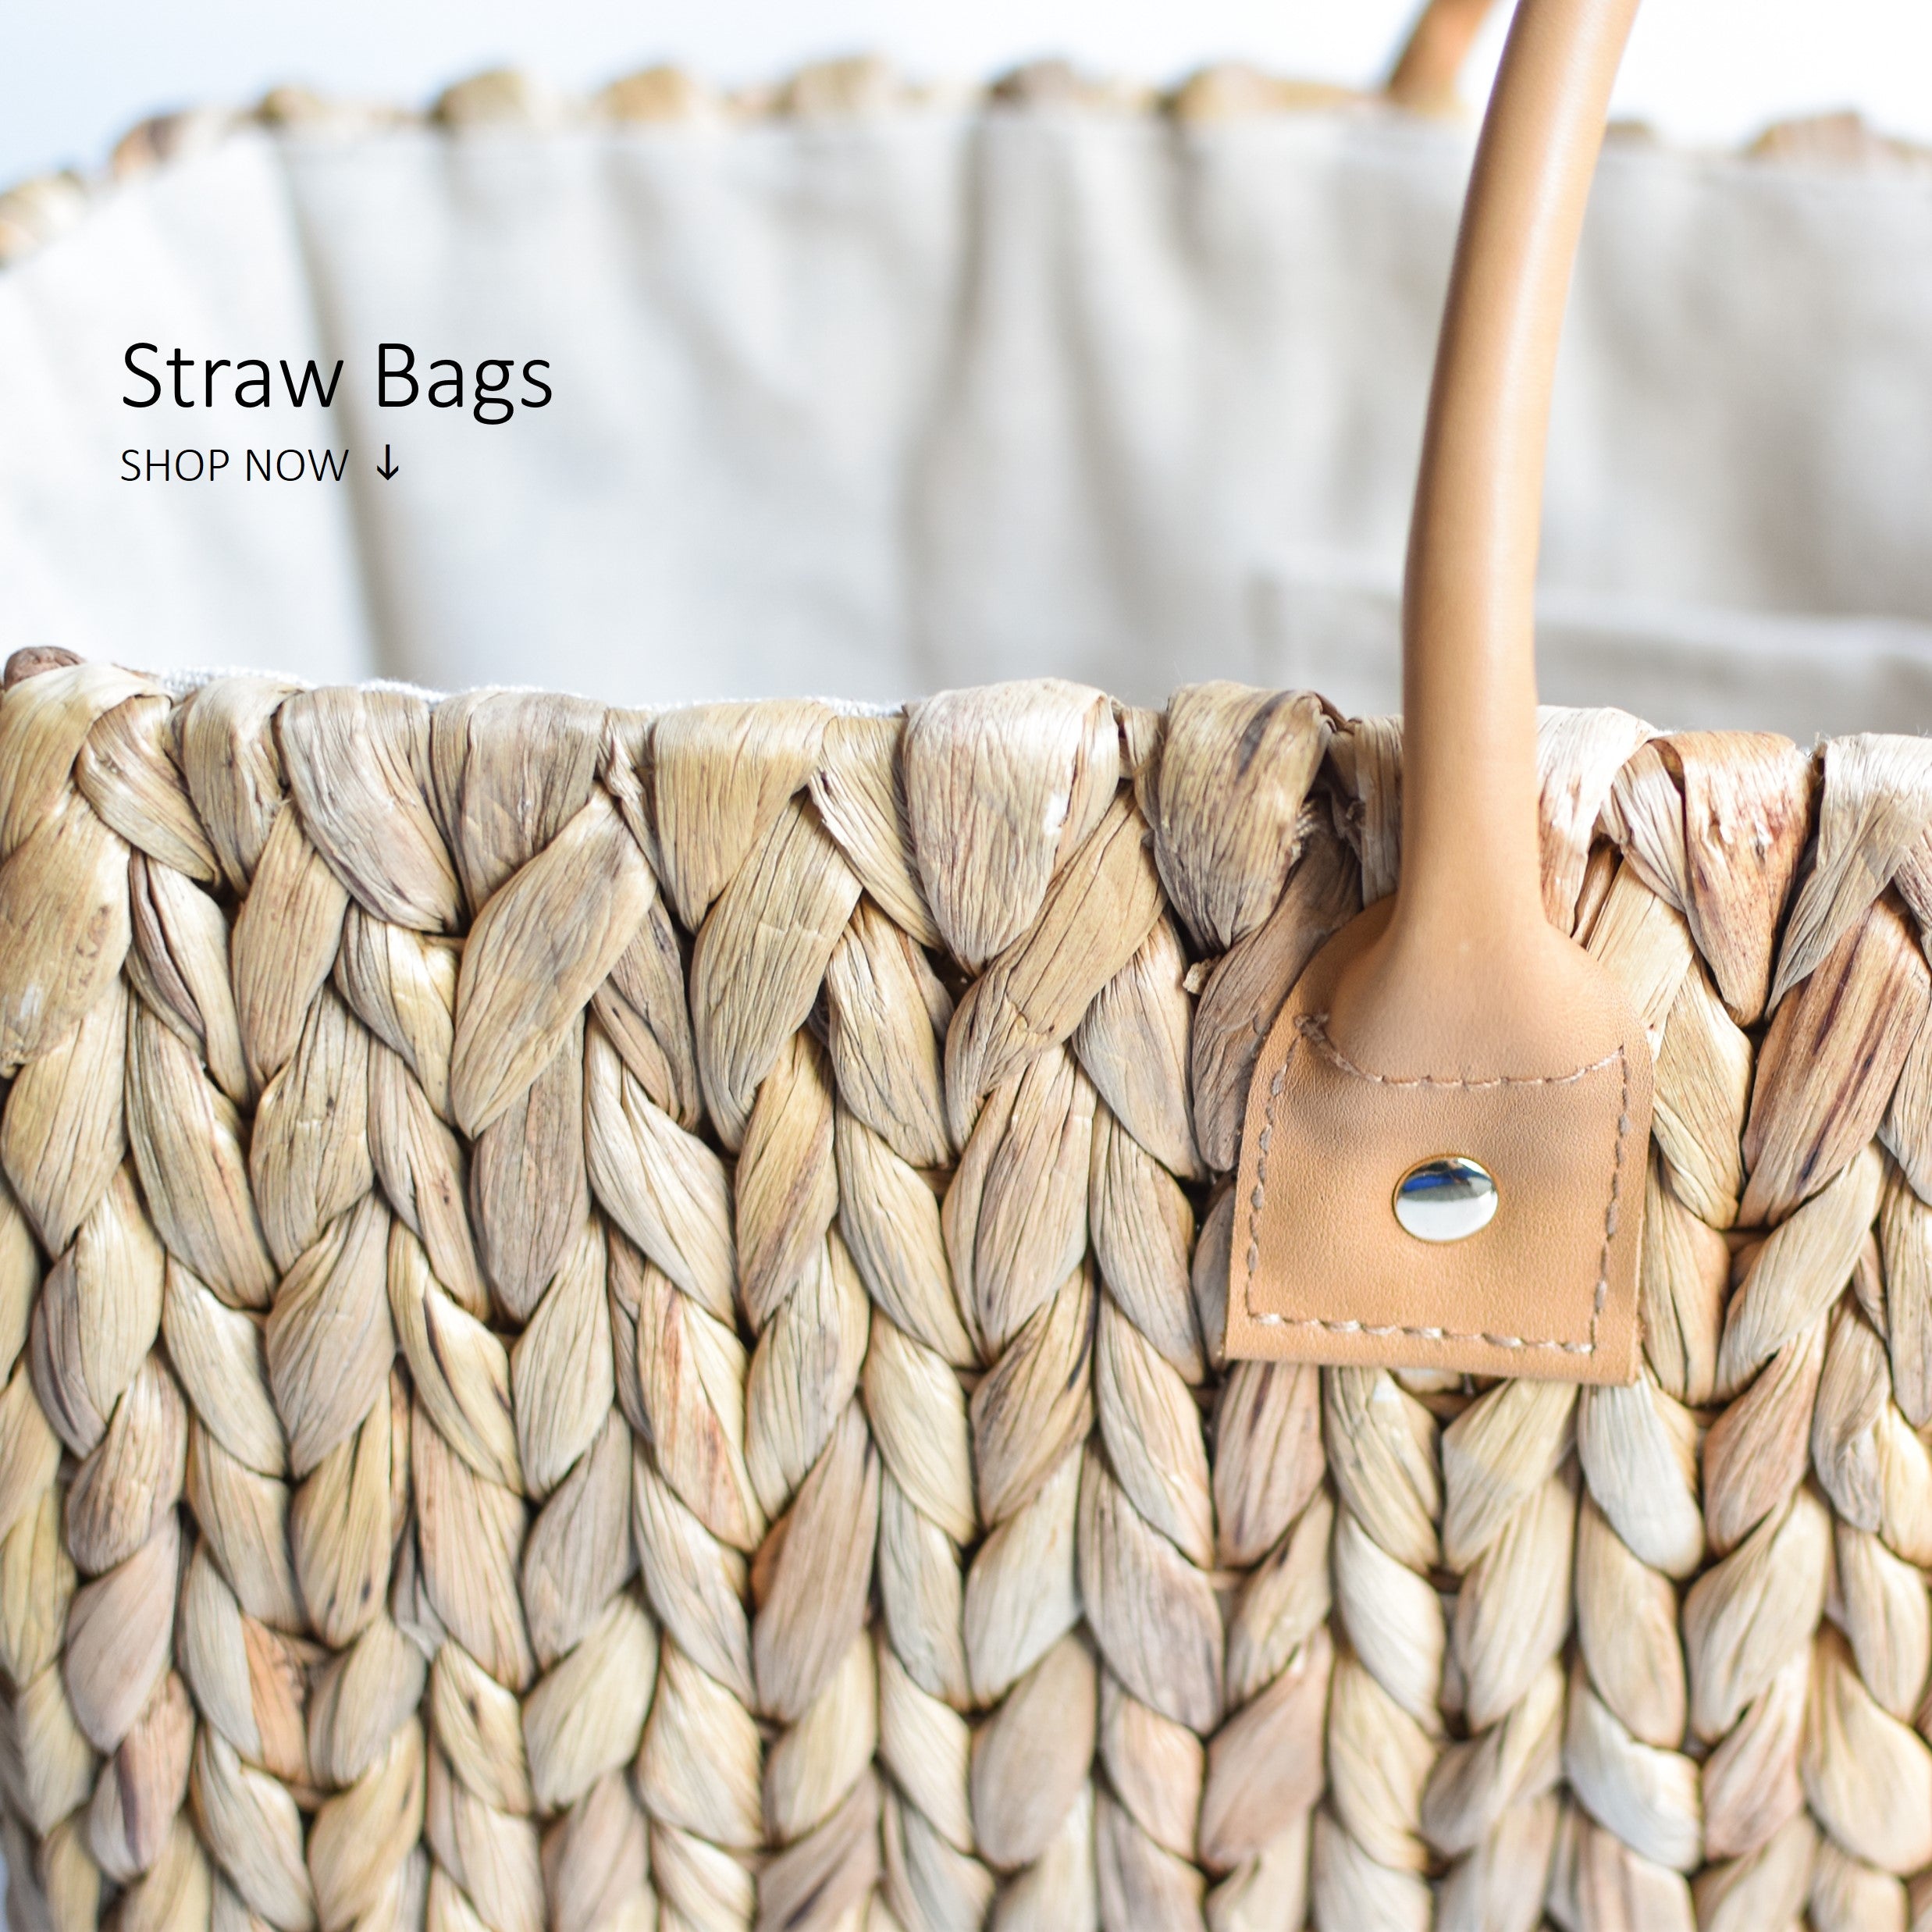 Close-up image of the XL Fullerton Straw Bag with Leather Handles